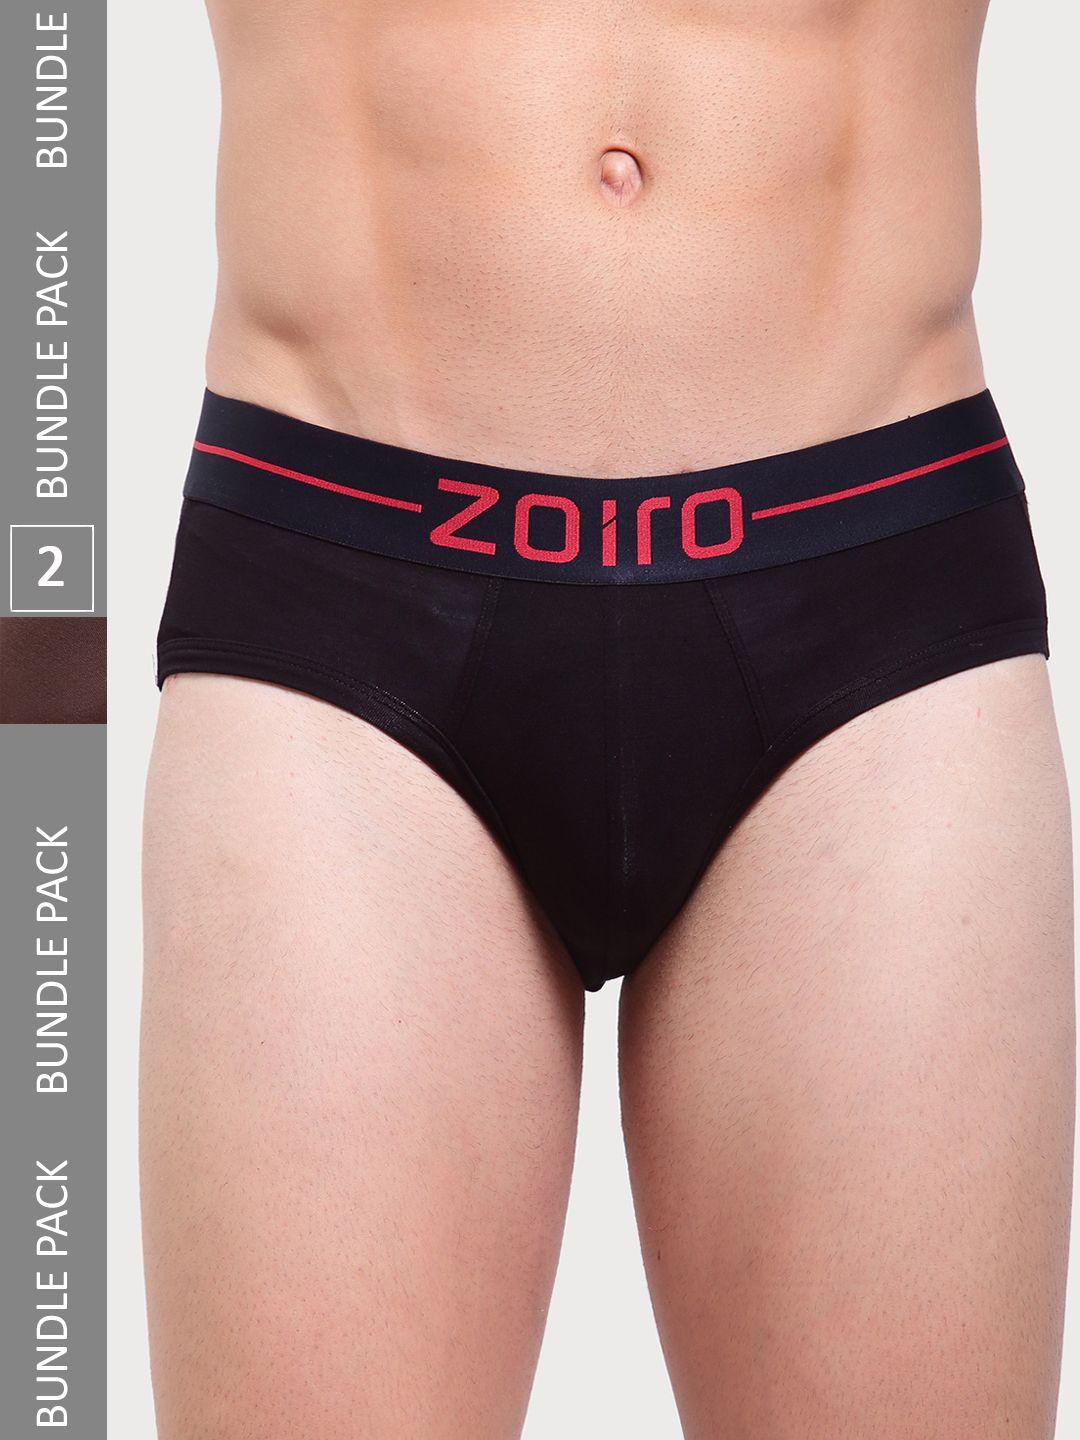 zoiro men pack of 2 mid-rise basic briefs softsbriefcanteen